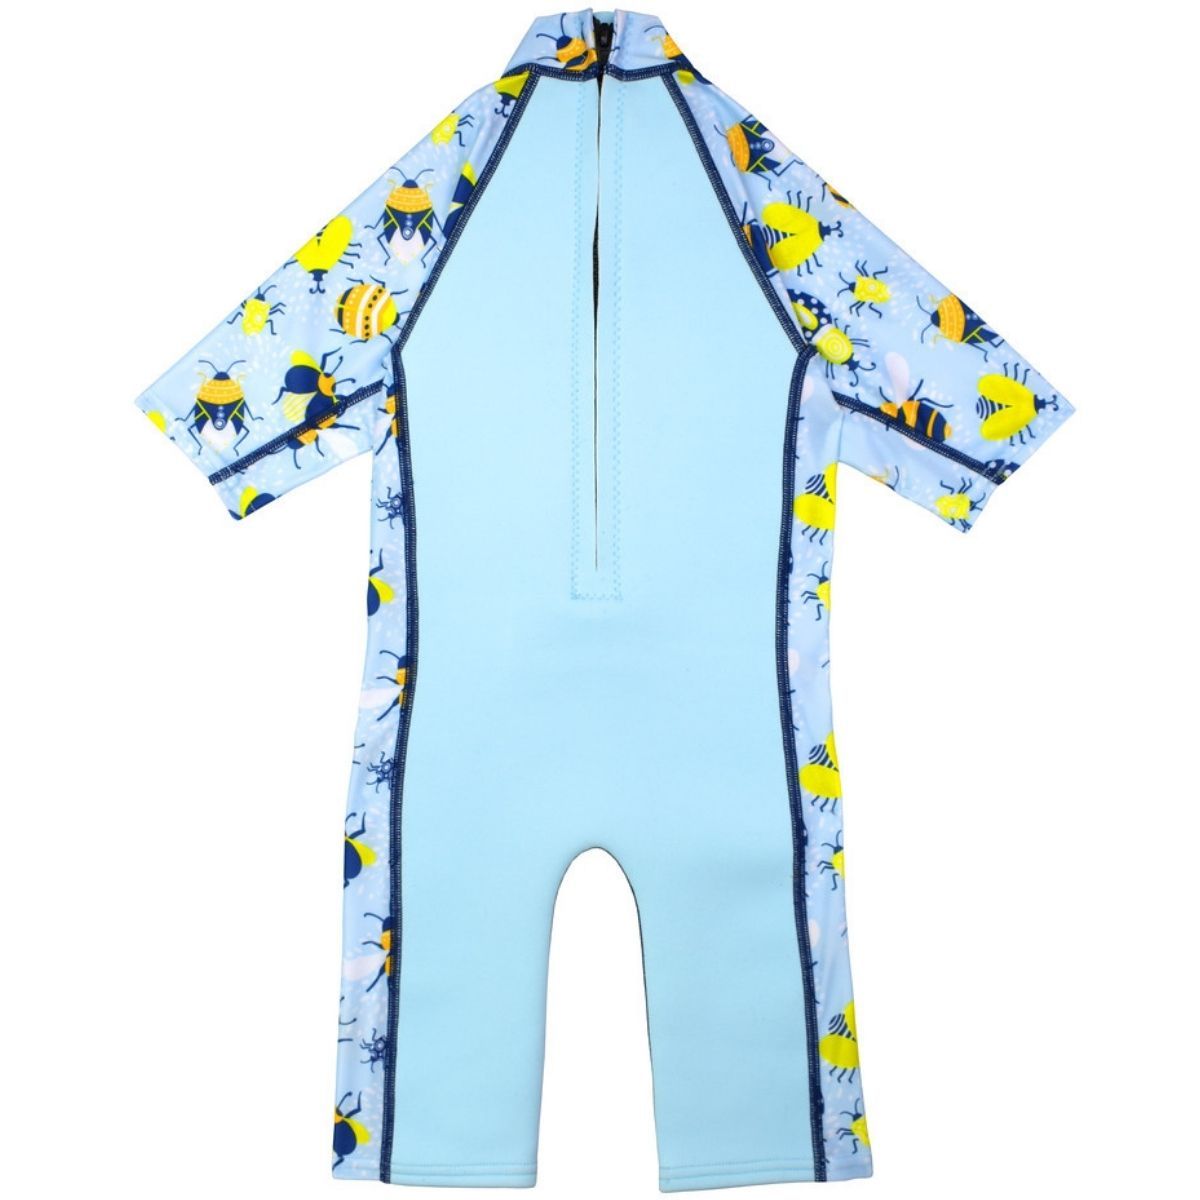 One piece UV sun and sea wetsuit for toddlers in light blue with navy blue trims. Insects themed print on sleeves, side panels and neck. Back.